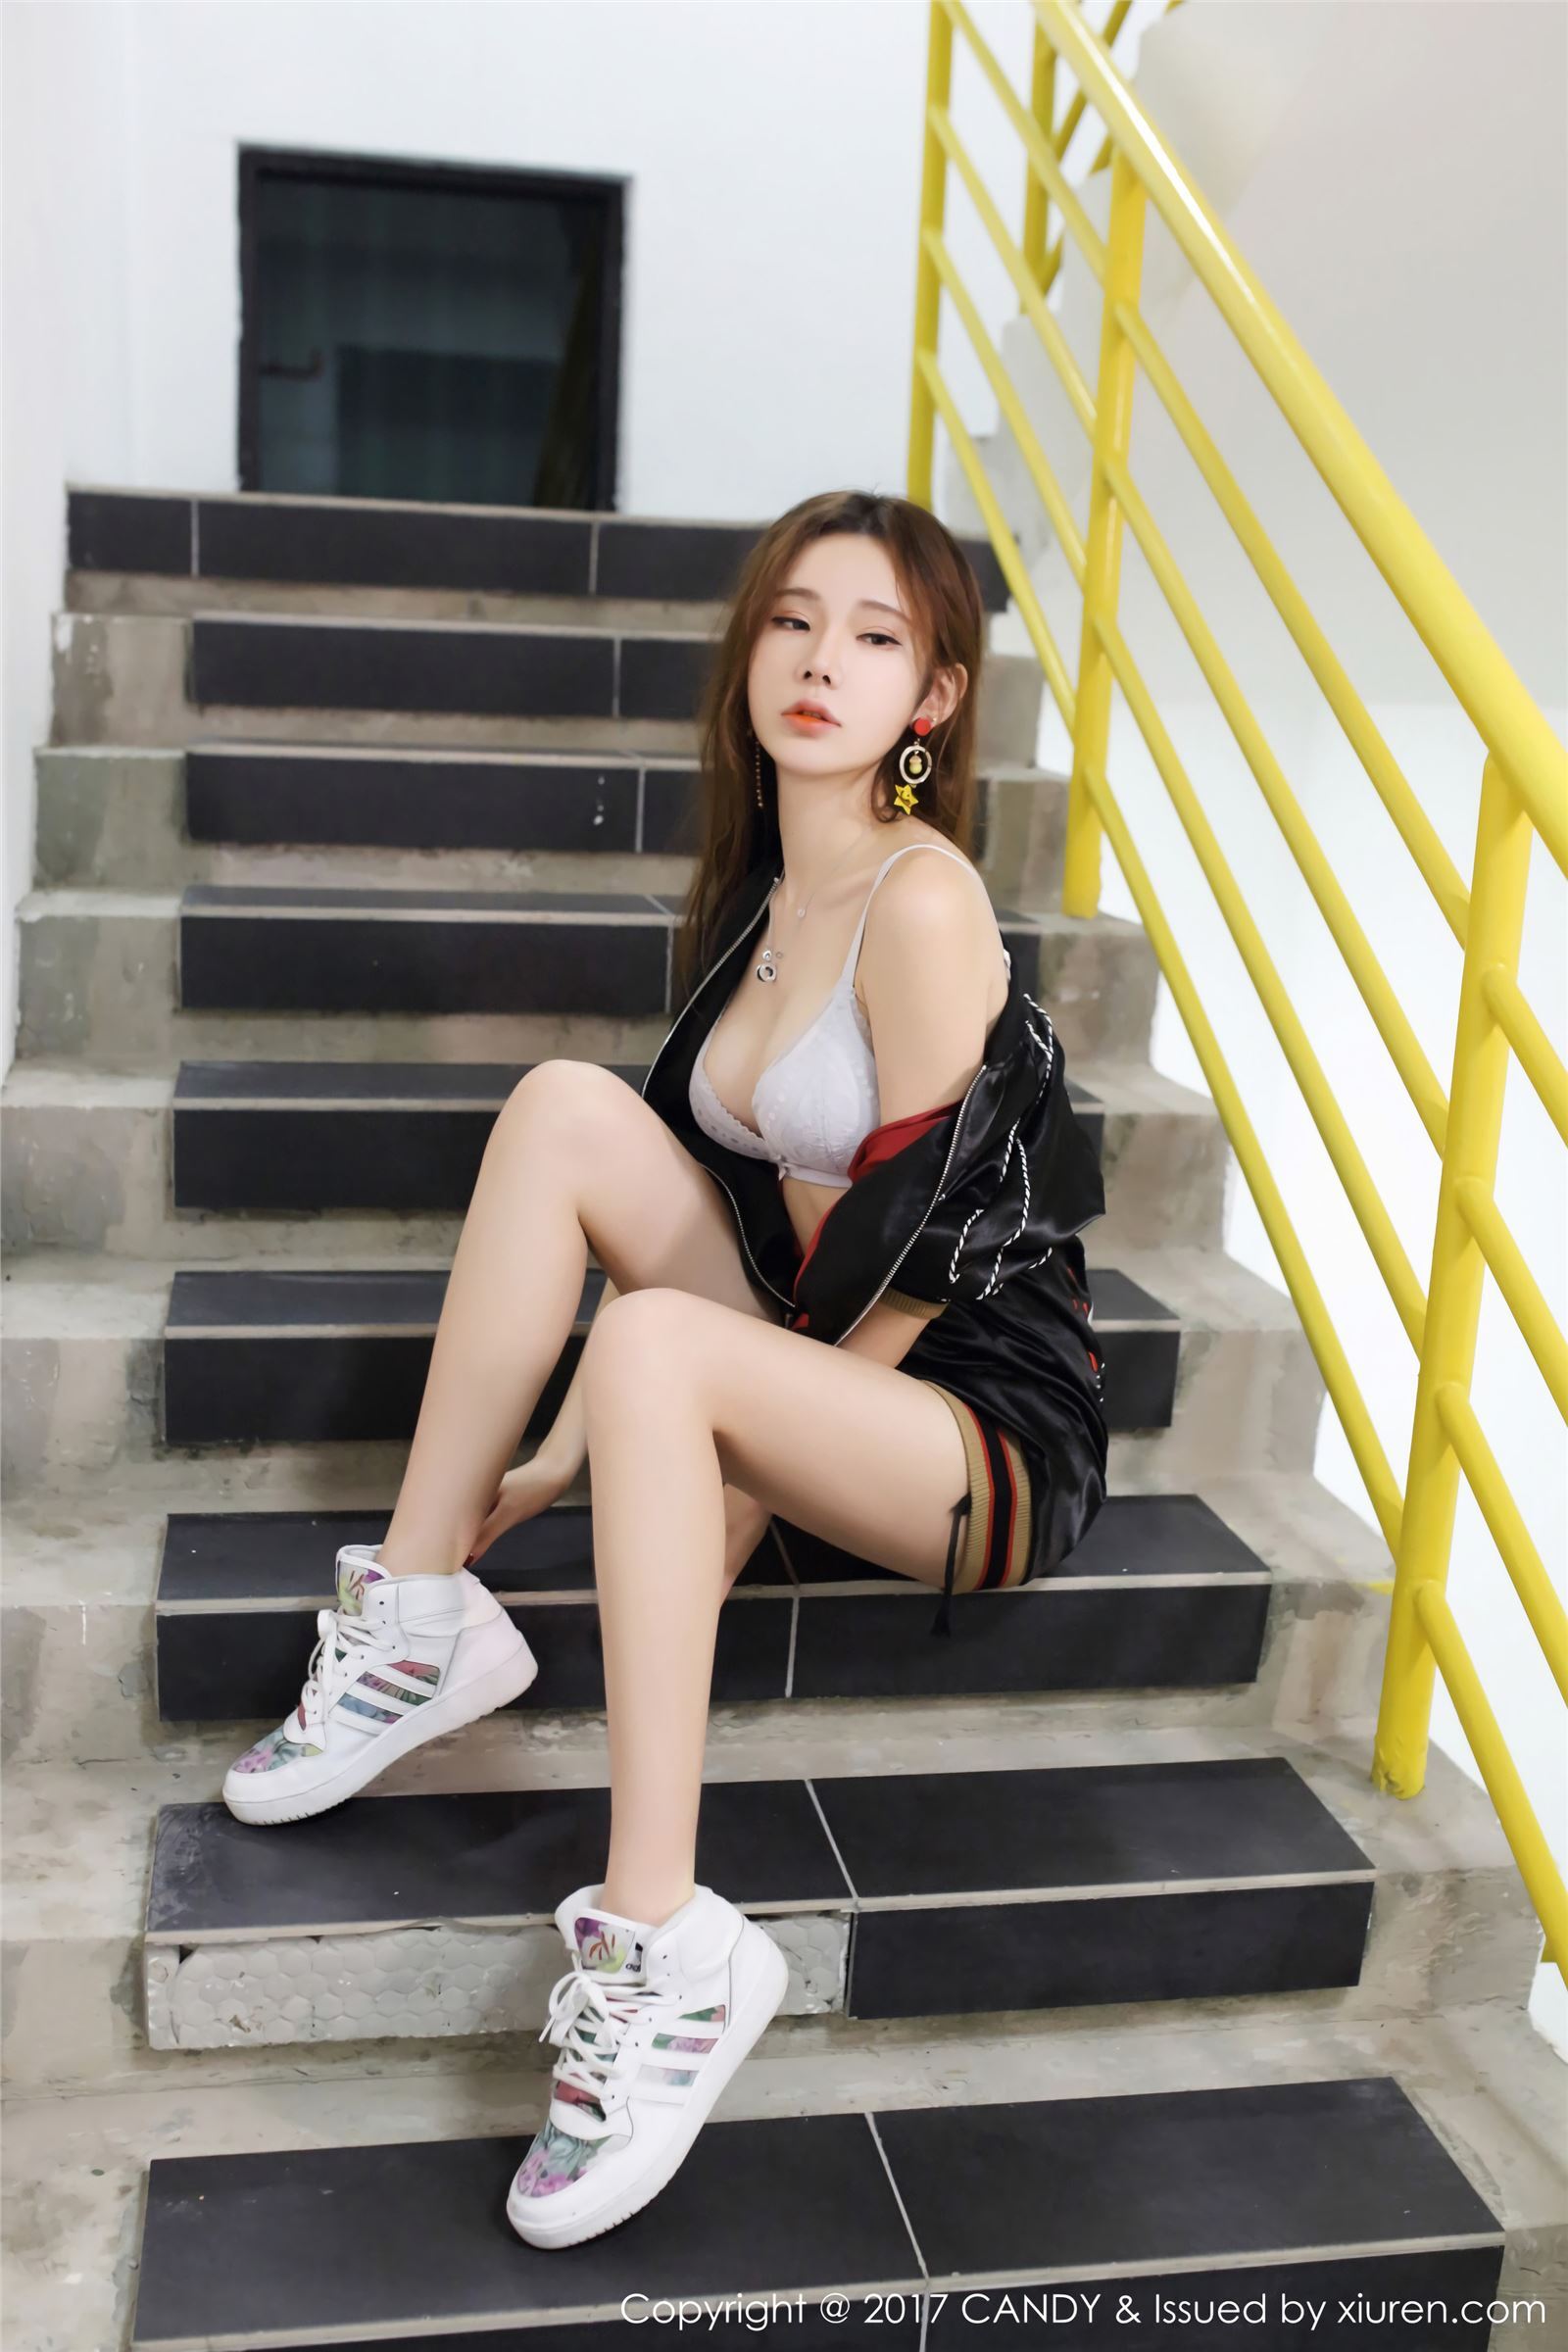 [candy pictorial] December 6, 2017 Vol.044 Mengqiqi Irene